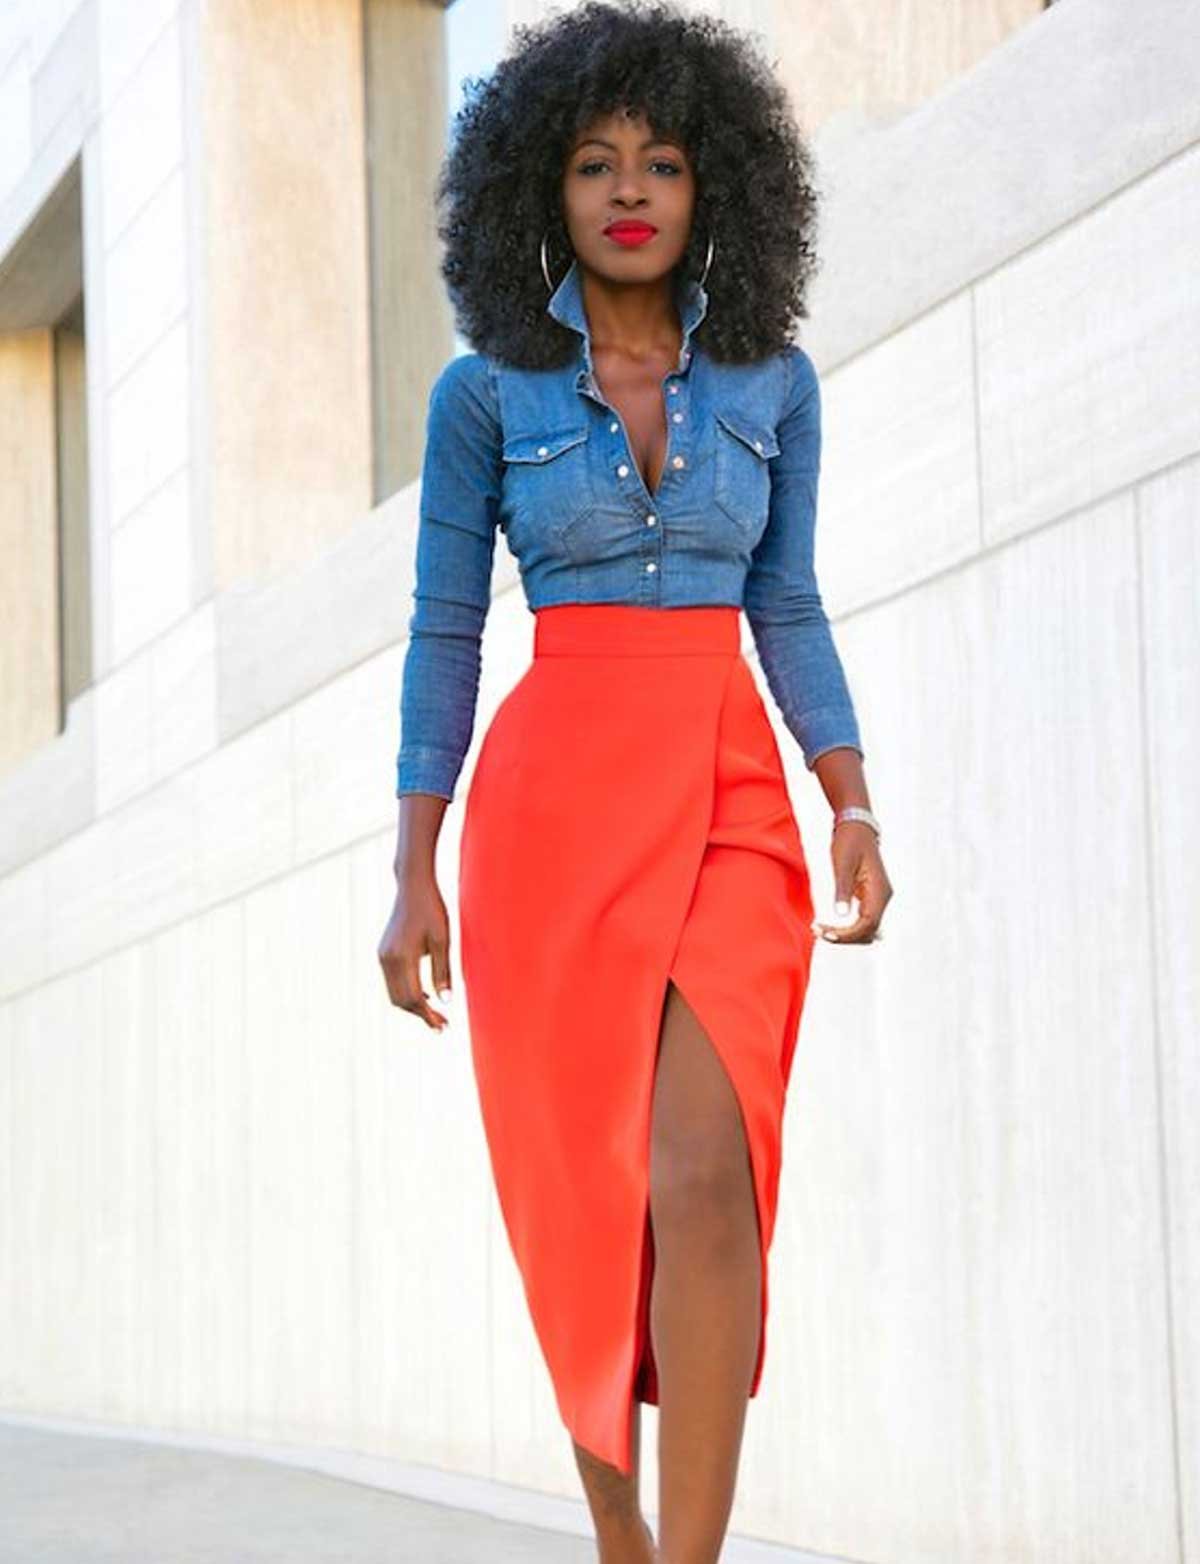 A bright-colored long slit skirt with a body-hugging denim shirt